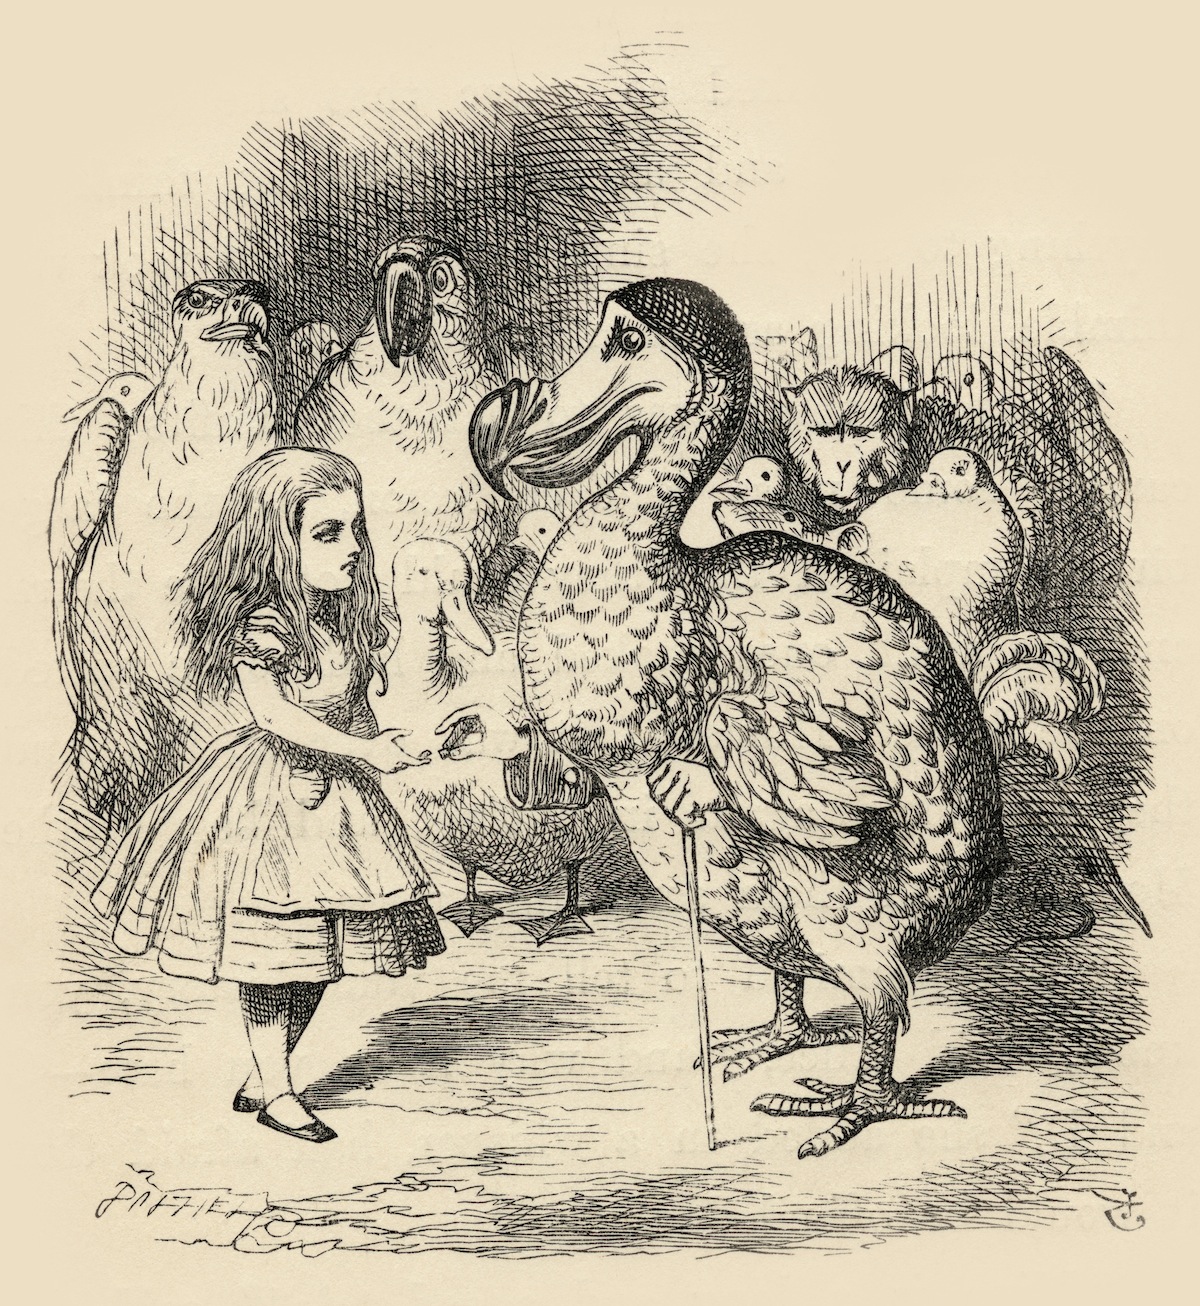 The Dodo solemnly presents Alice with a thimble Illustration by John Tenniel from the book Alices's Adventures in Wonderland by Lewis Carroll published 1891